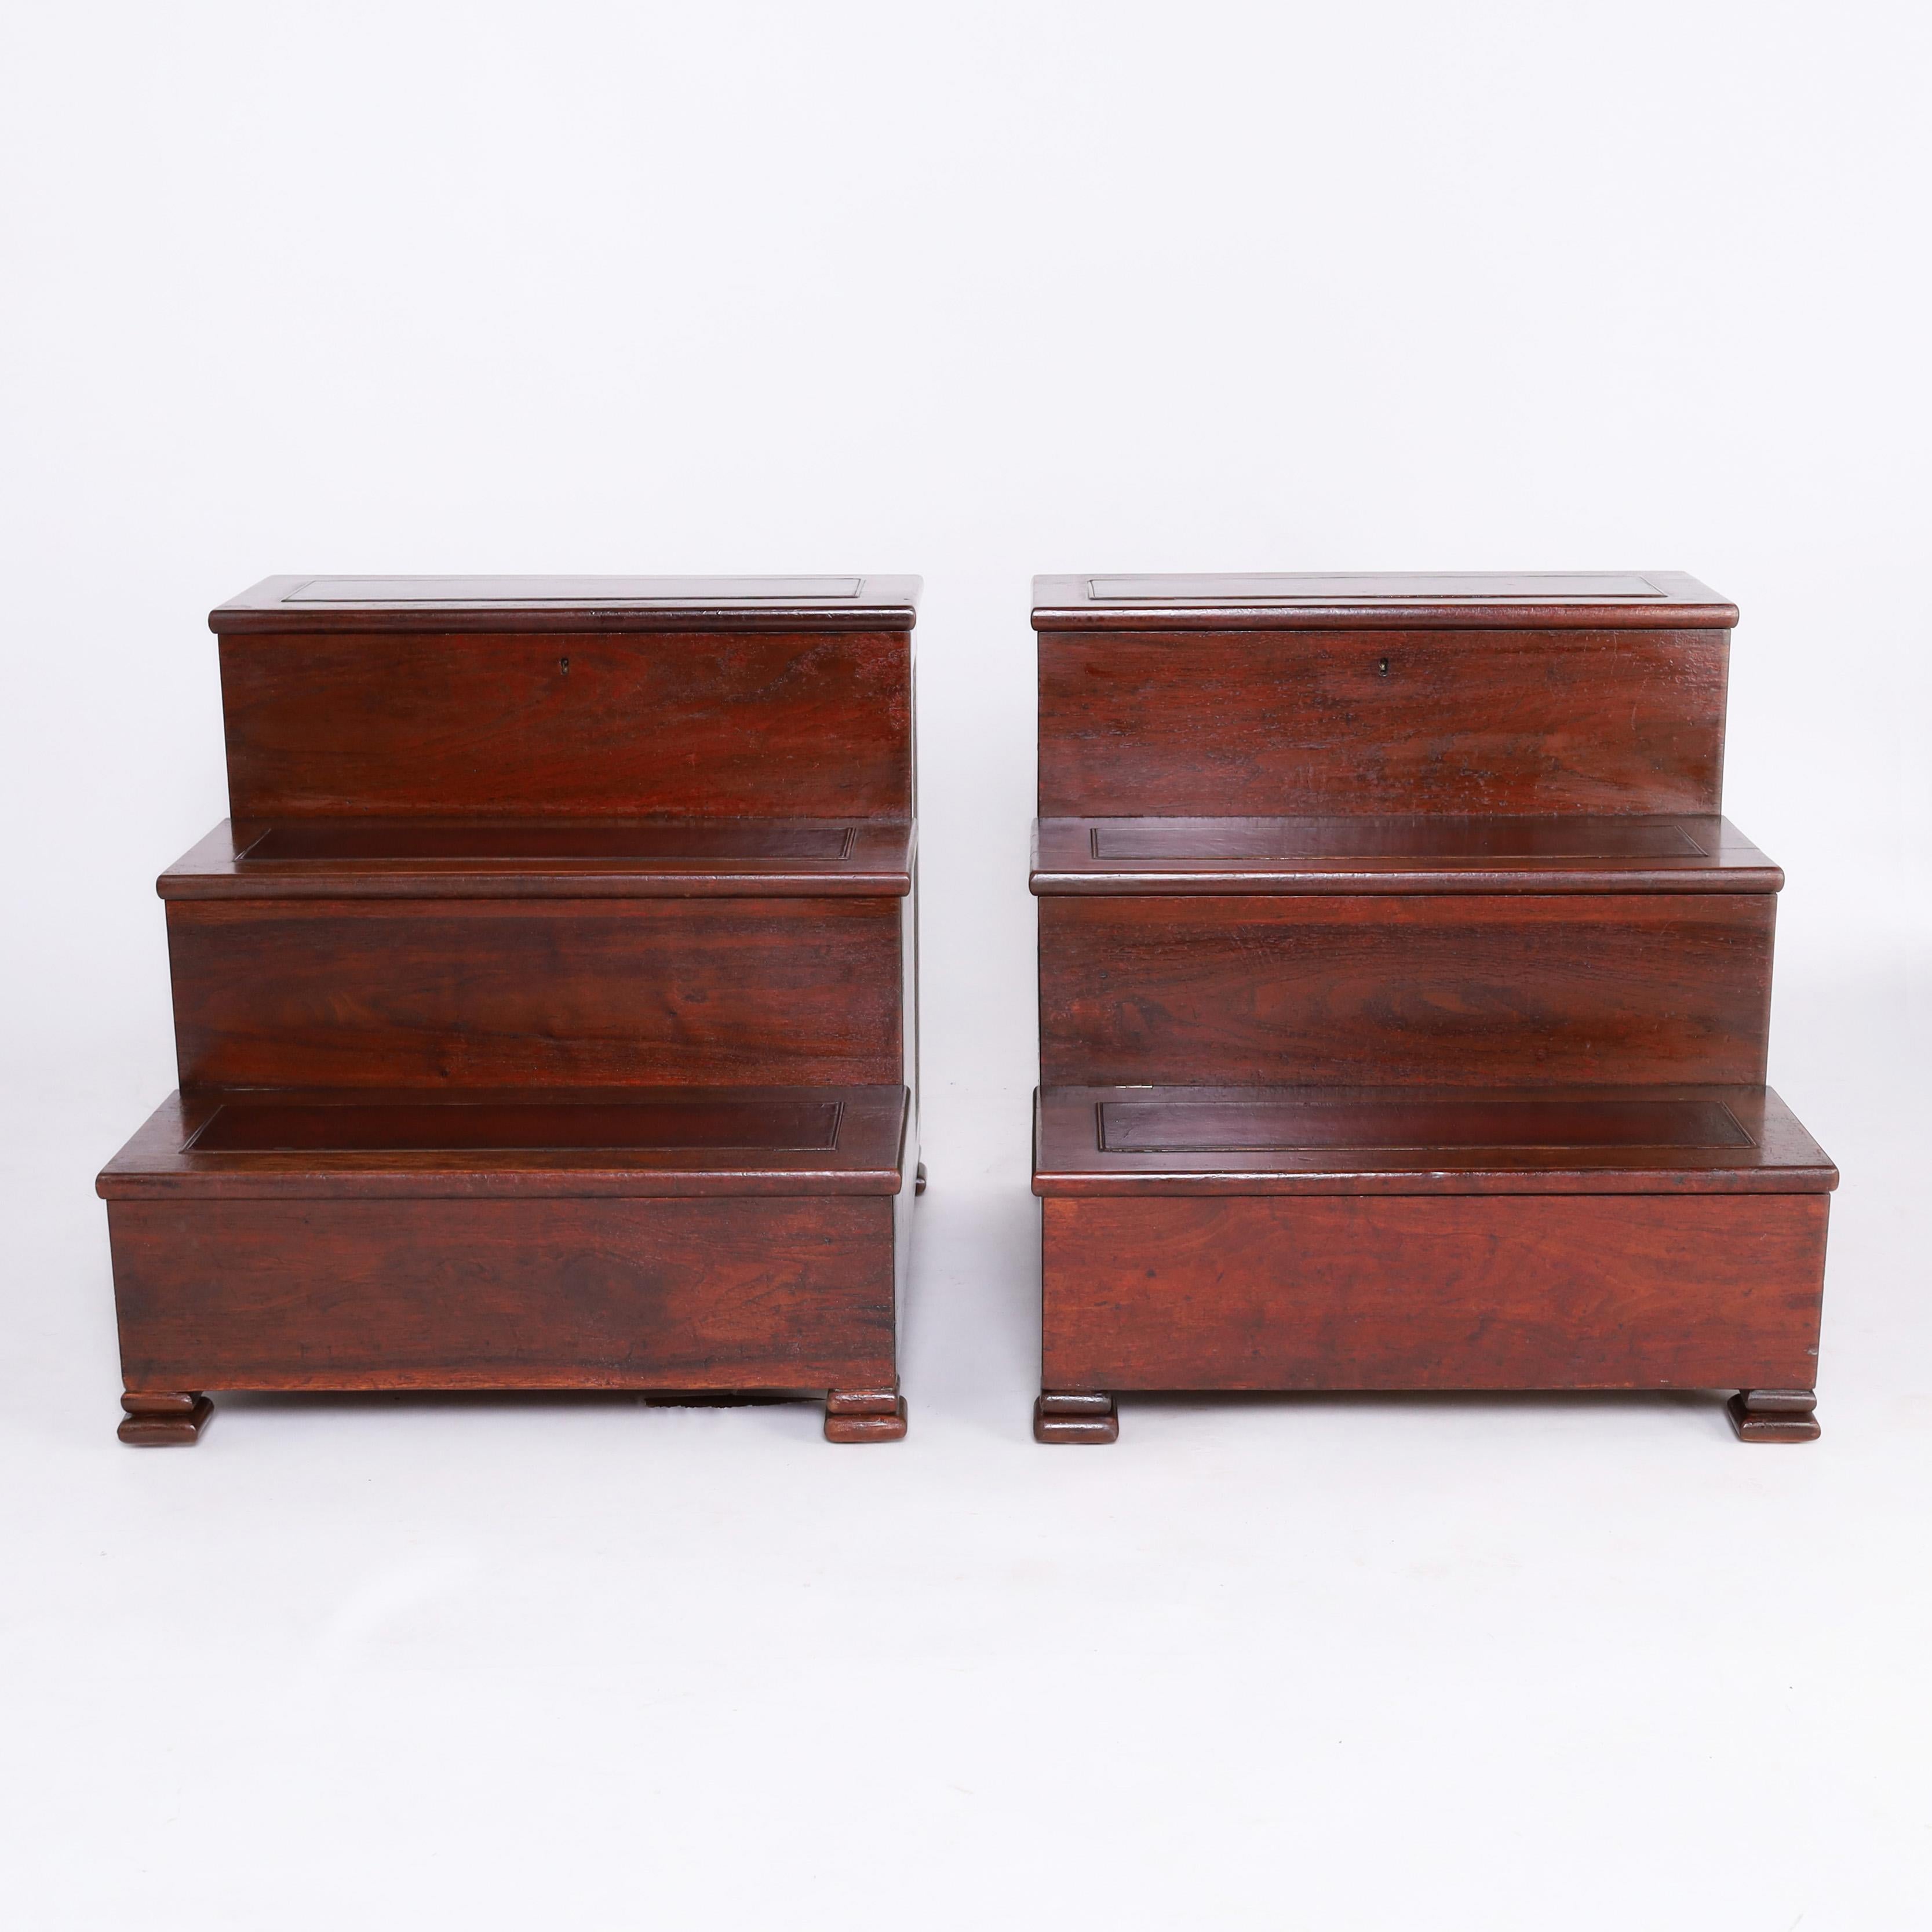 Handsome pair of 19th century English library or bed steps crafted in mahogany with three tiers having leather pads over hinged storage compartments, caned panels, and double bun feet. 